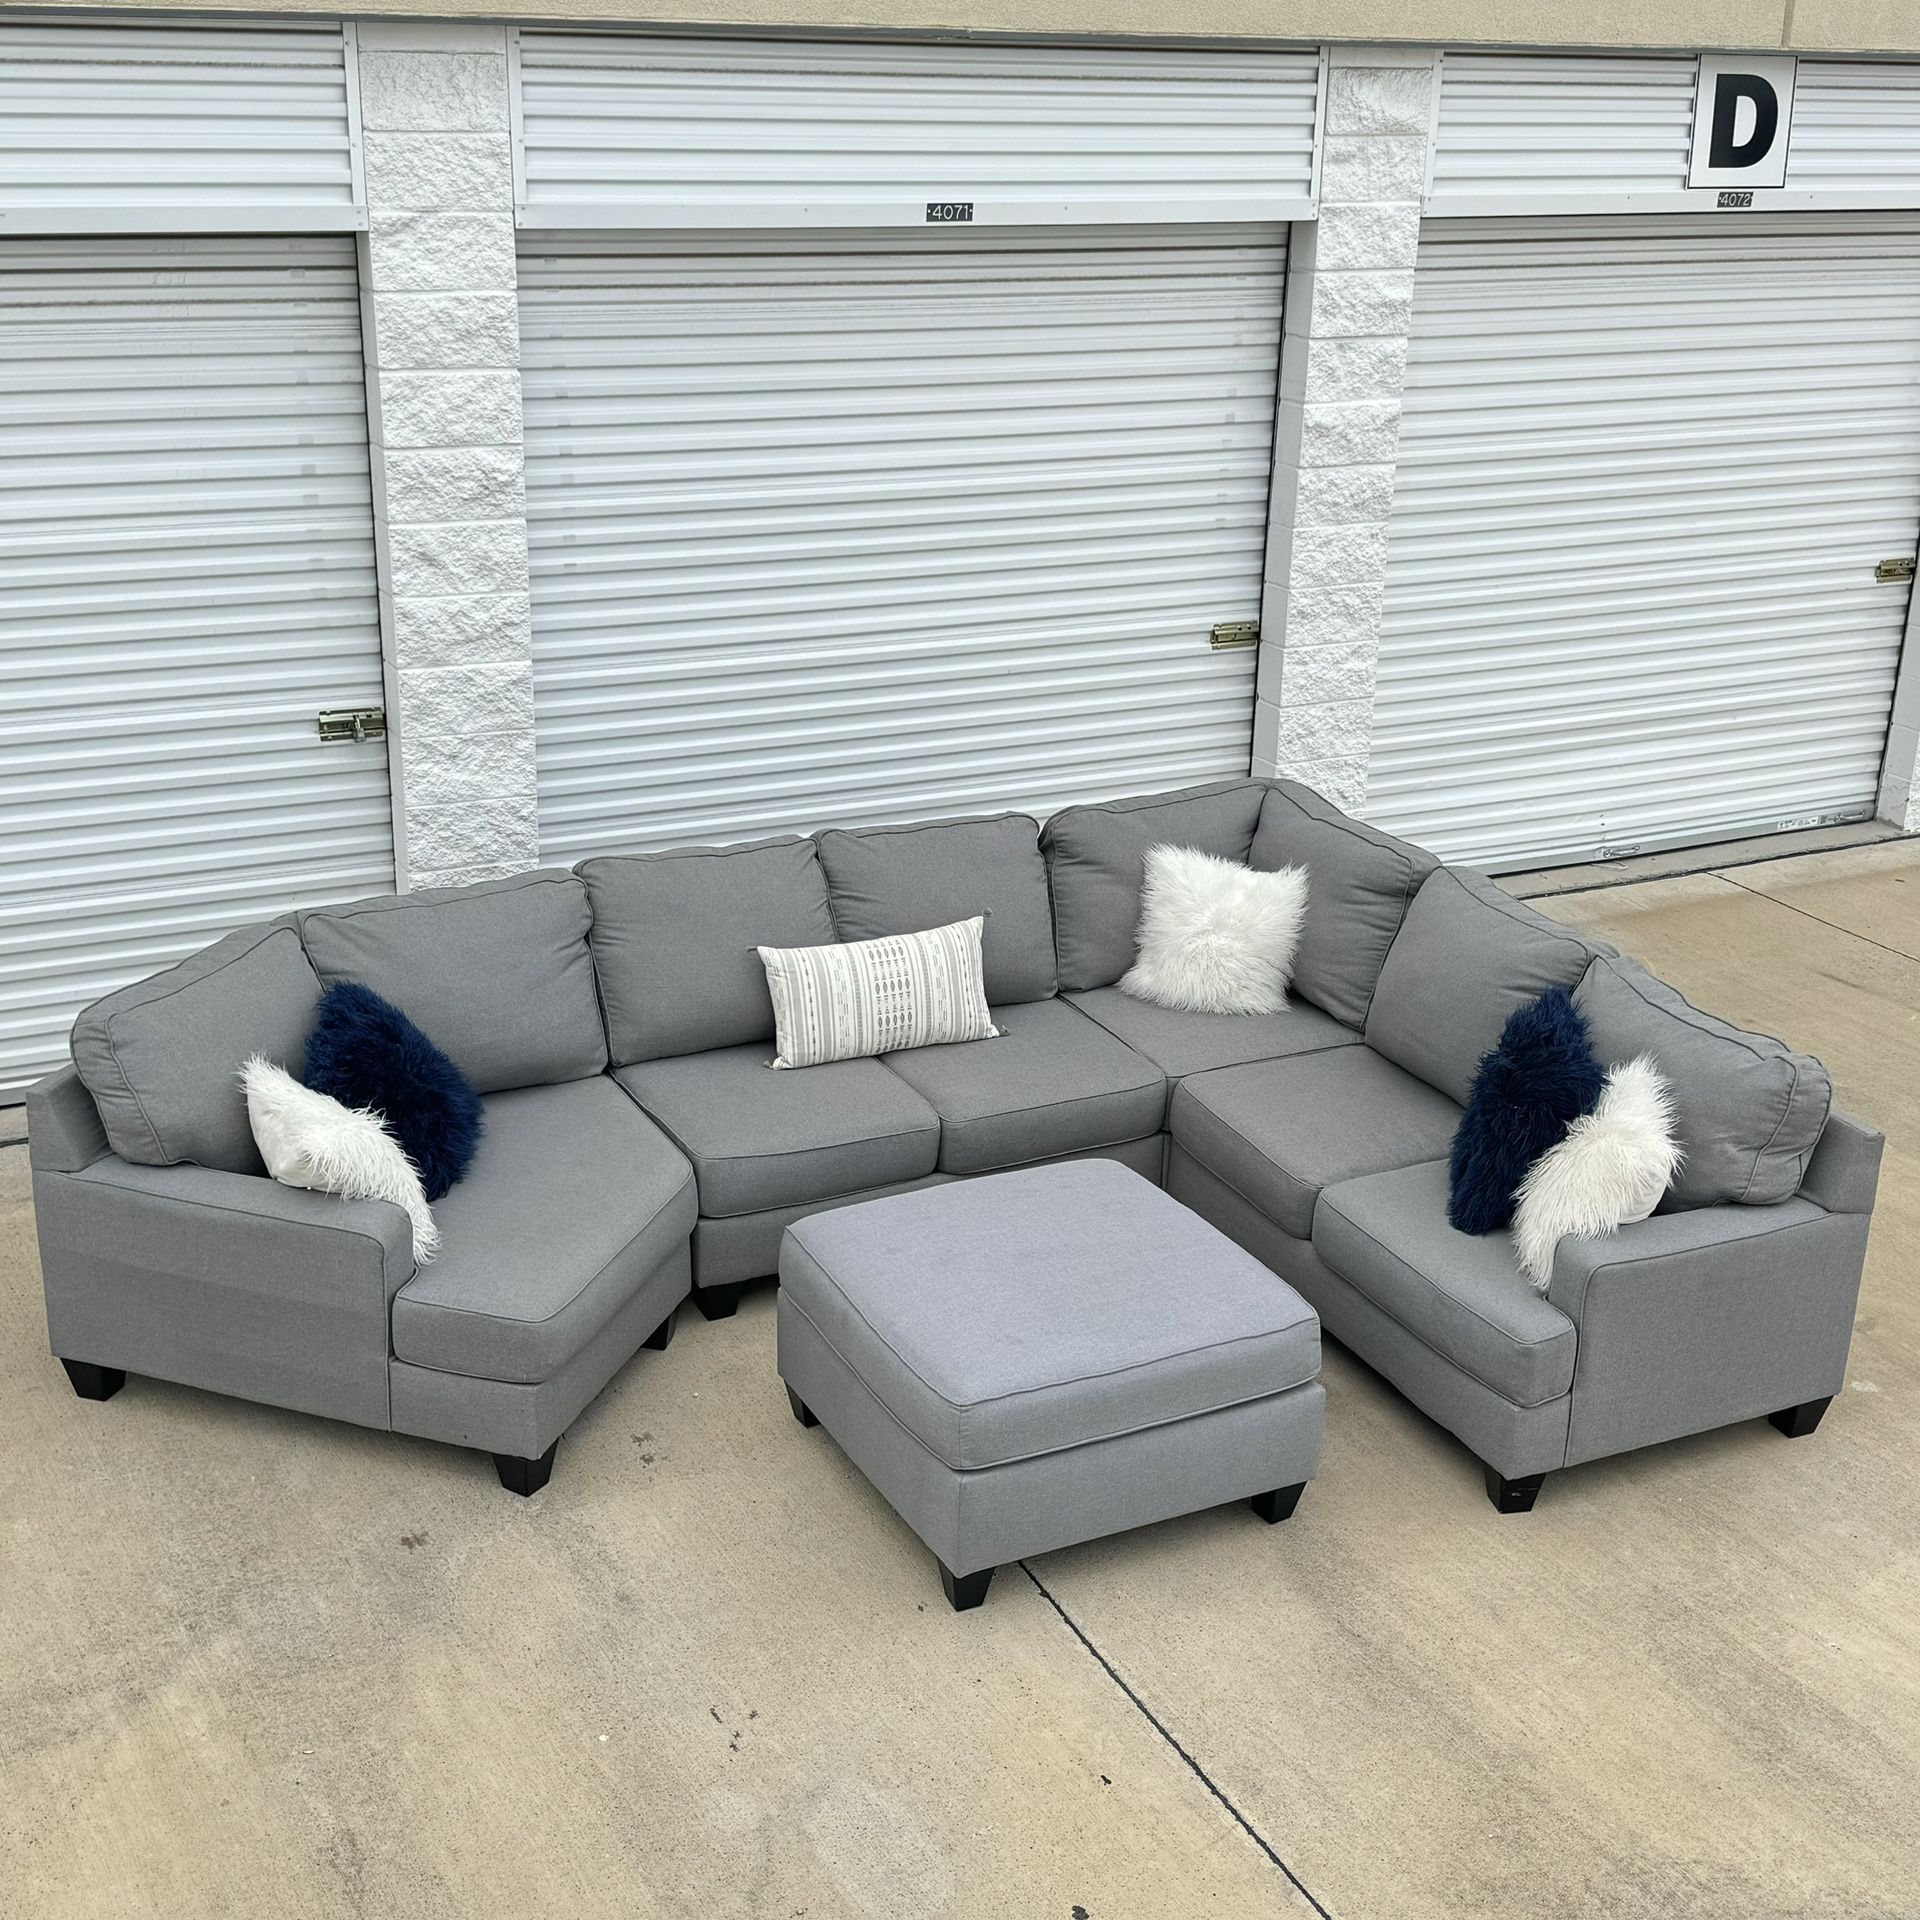 BEAUTIFUL🤩LARGE GRAY SECTIONAL COUCH & OTTOMAN🛋️FREE DELIVERY 🚚‼️